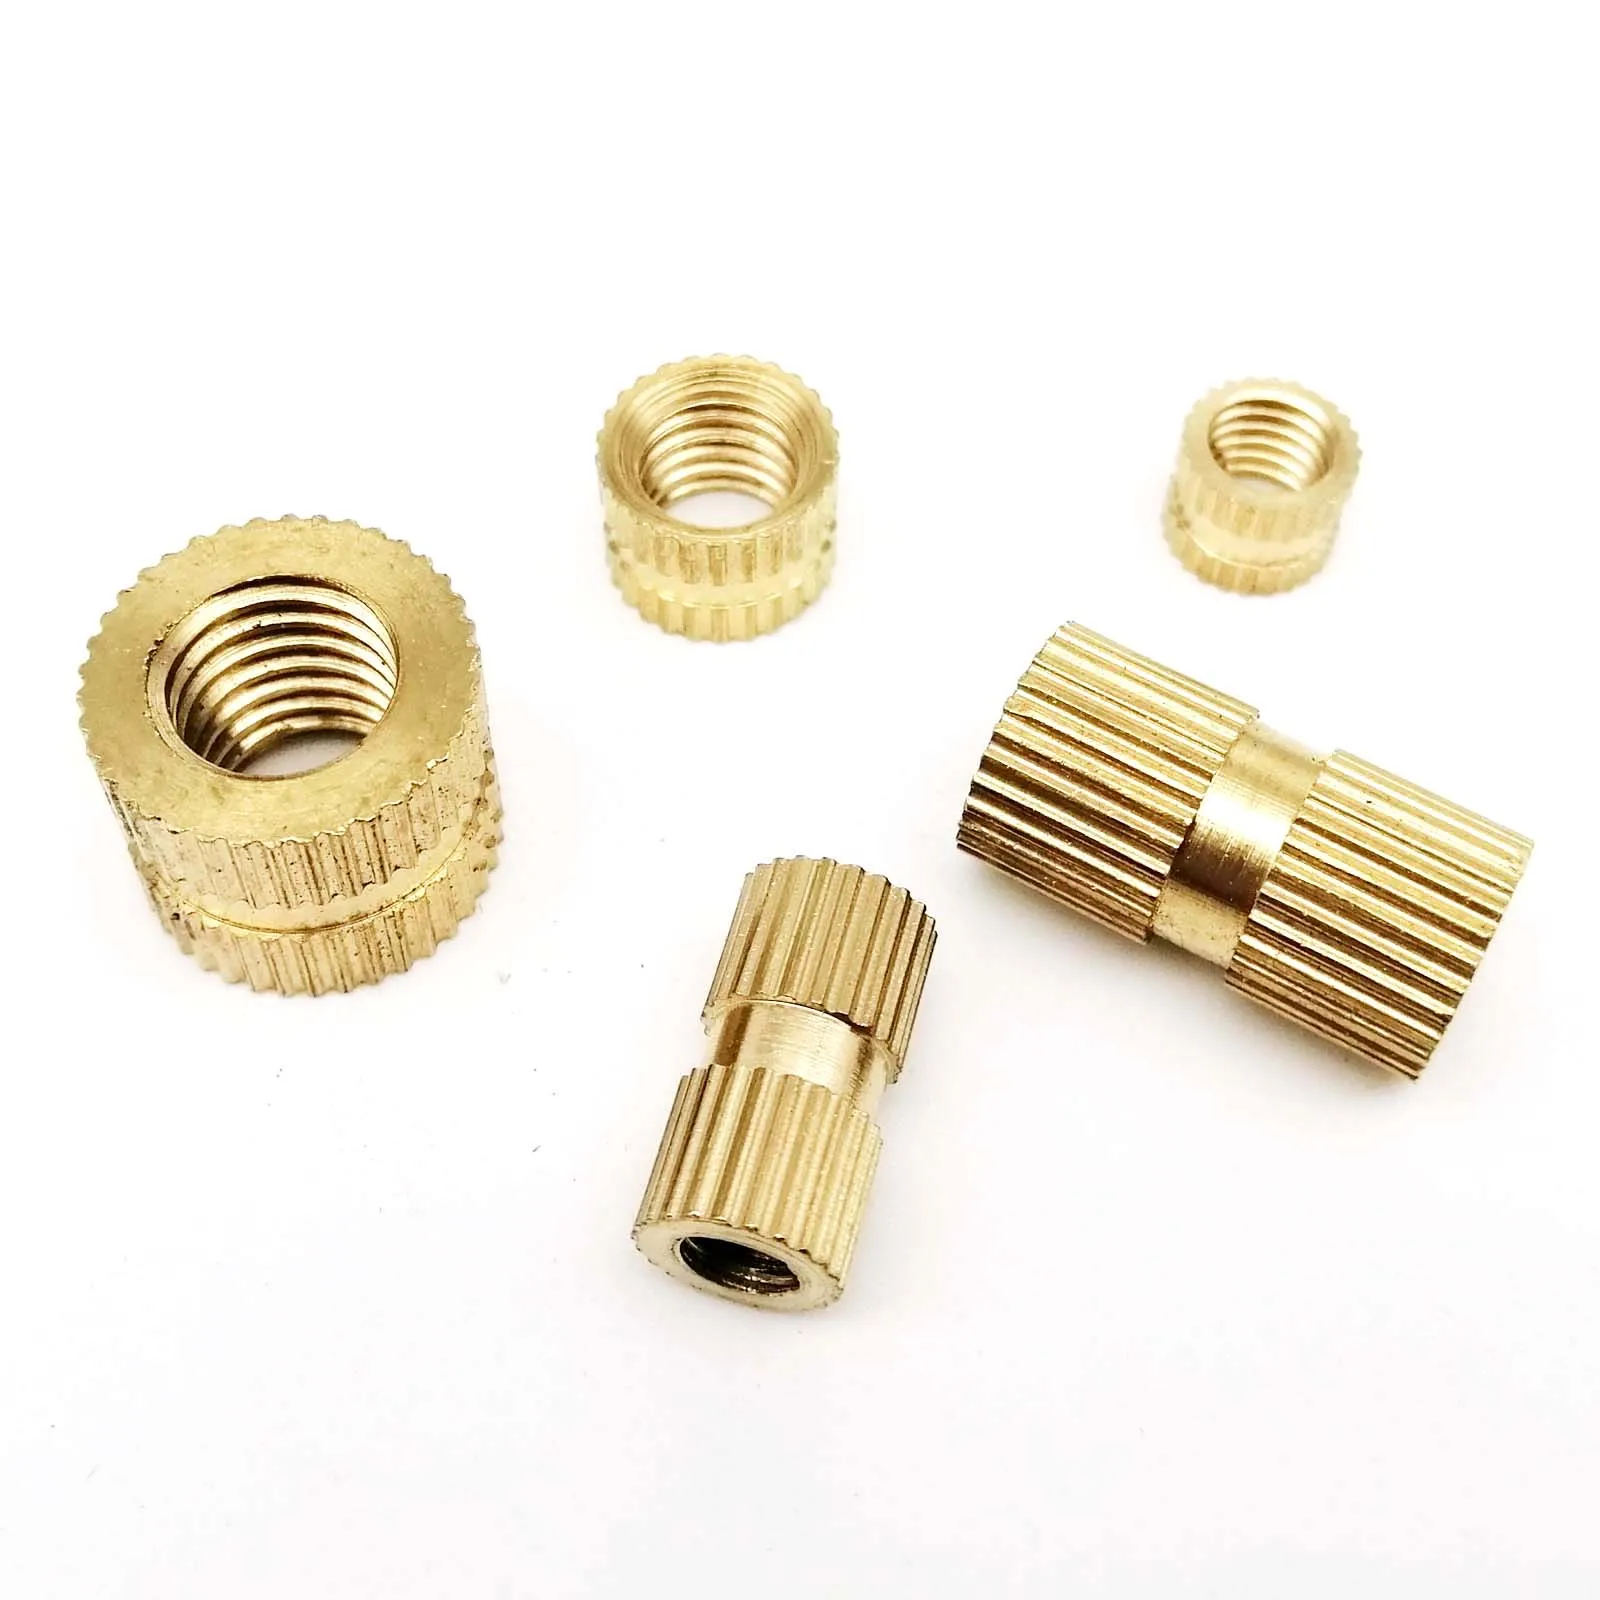 M3 Press-In Copper Brass Inserts Embedded Knurl Threaded Nuts Parts for Plastic 